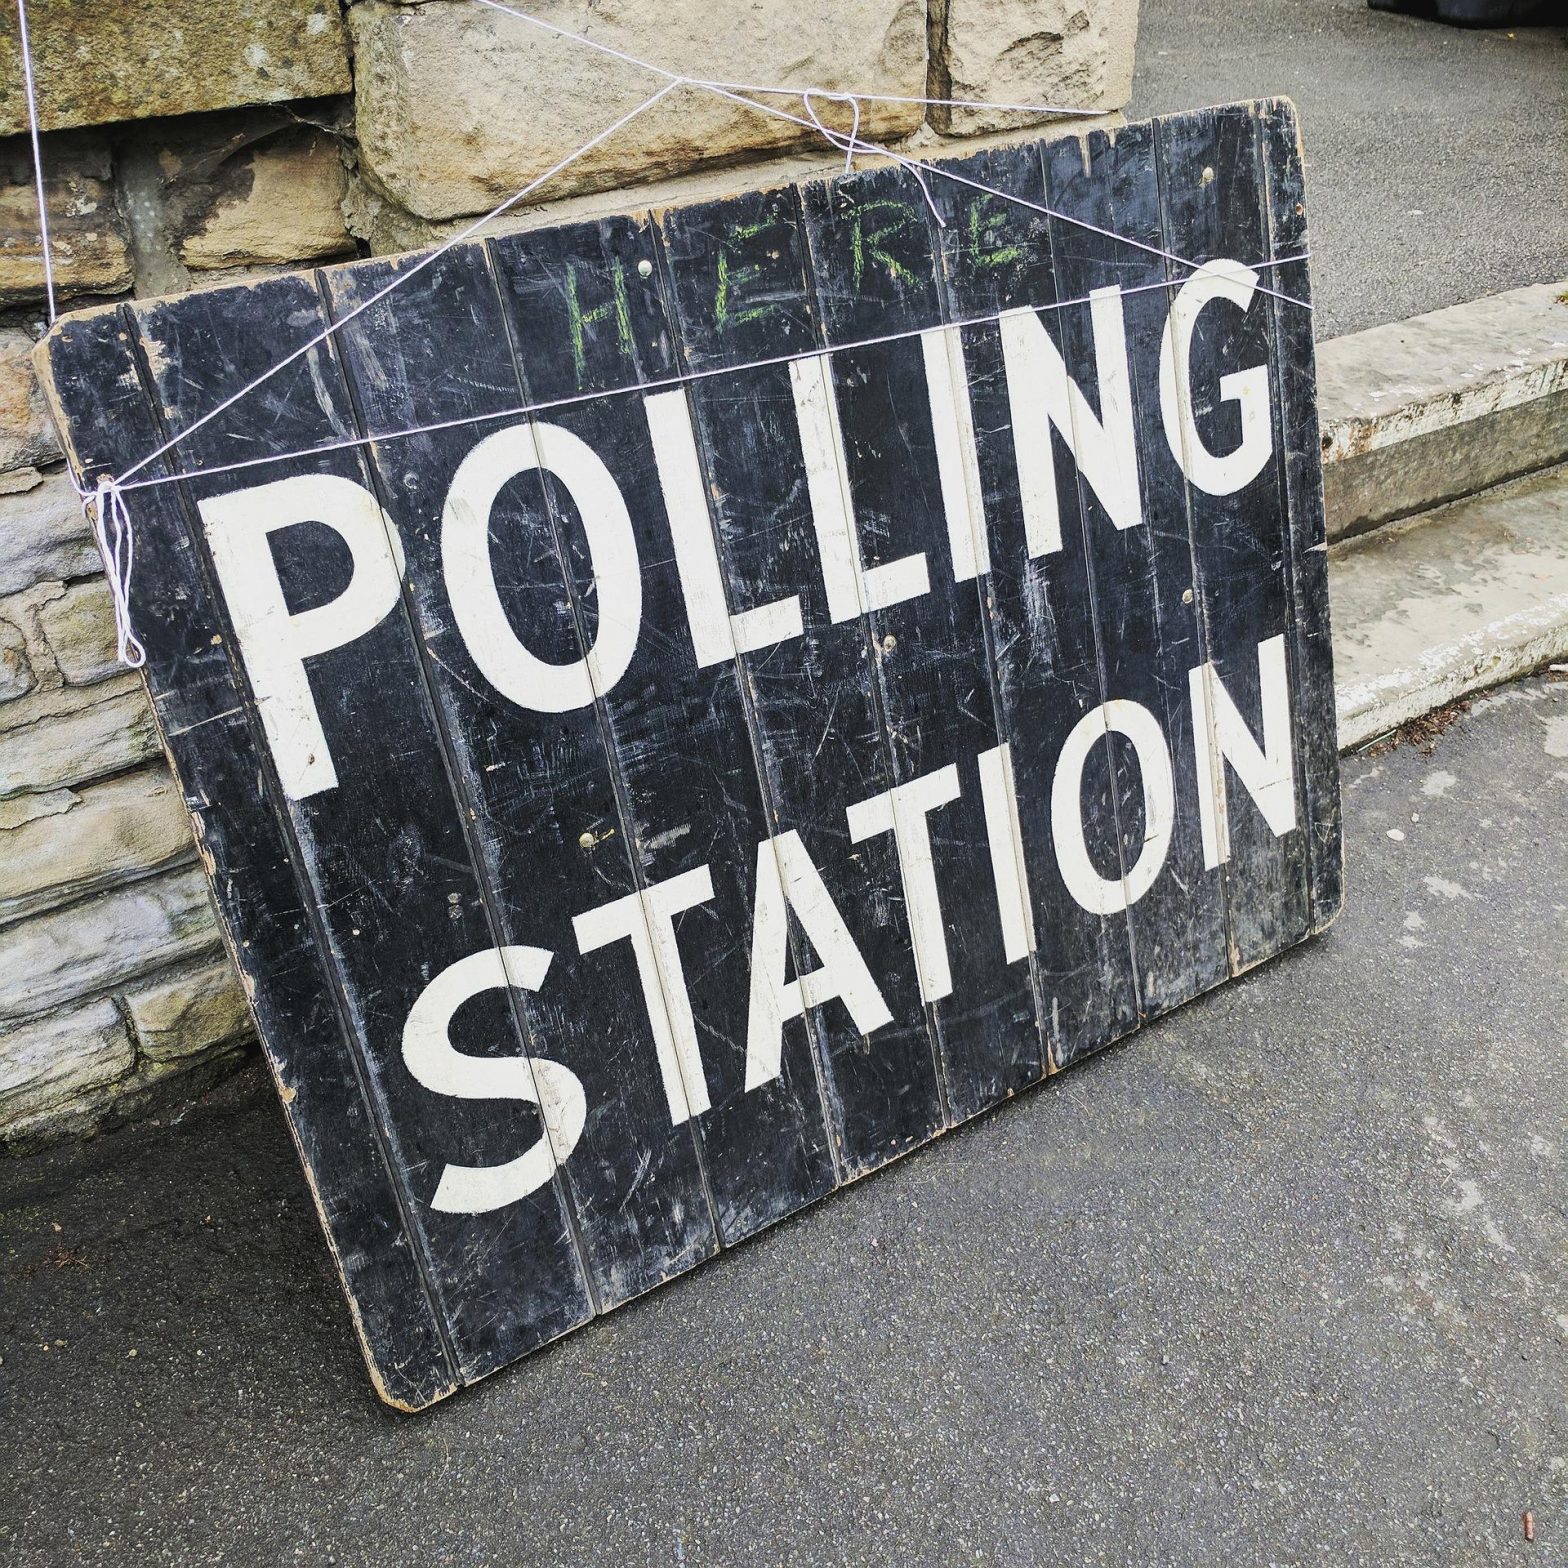 Large sign on ground with text: Polling Station